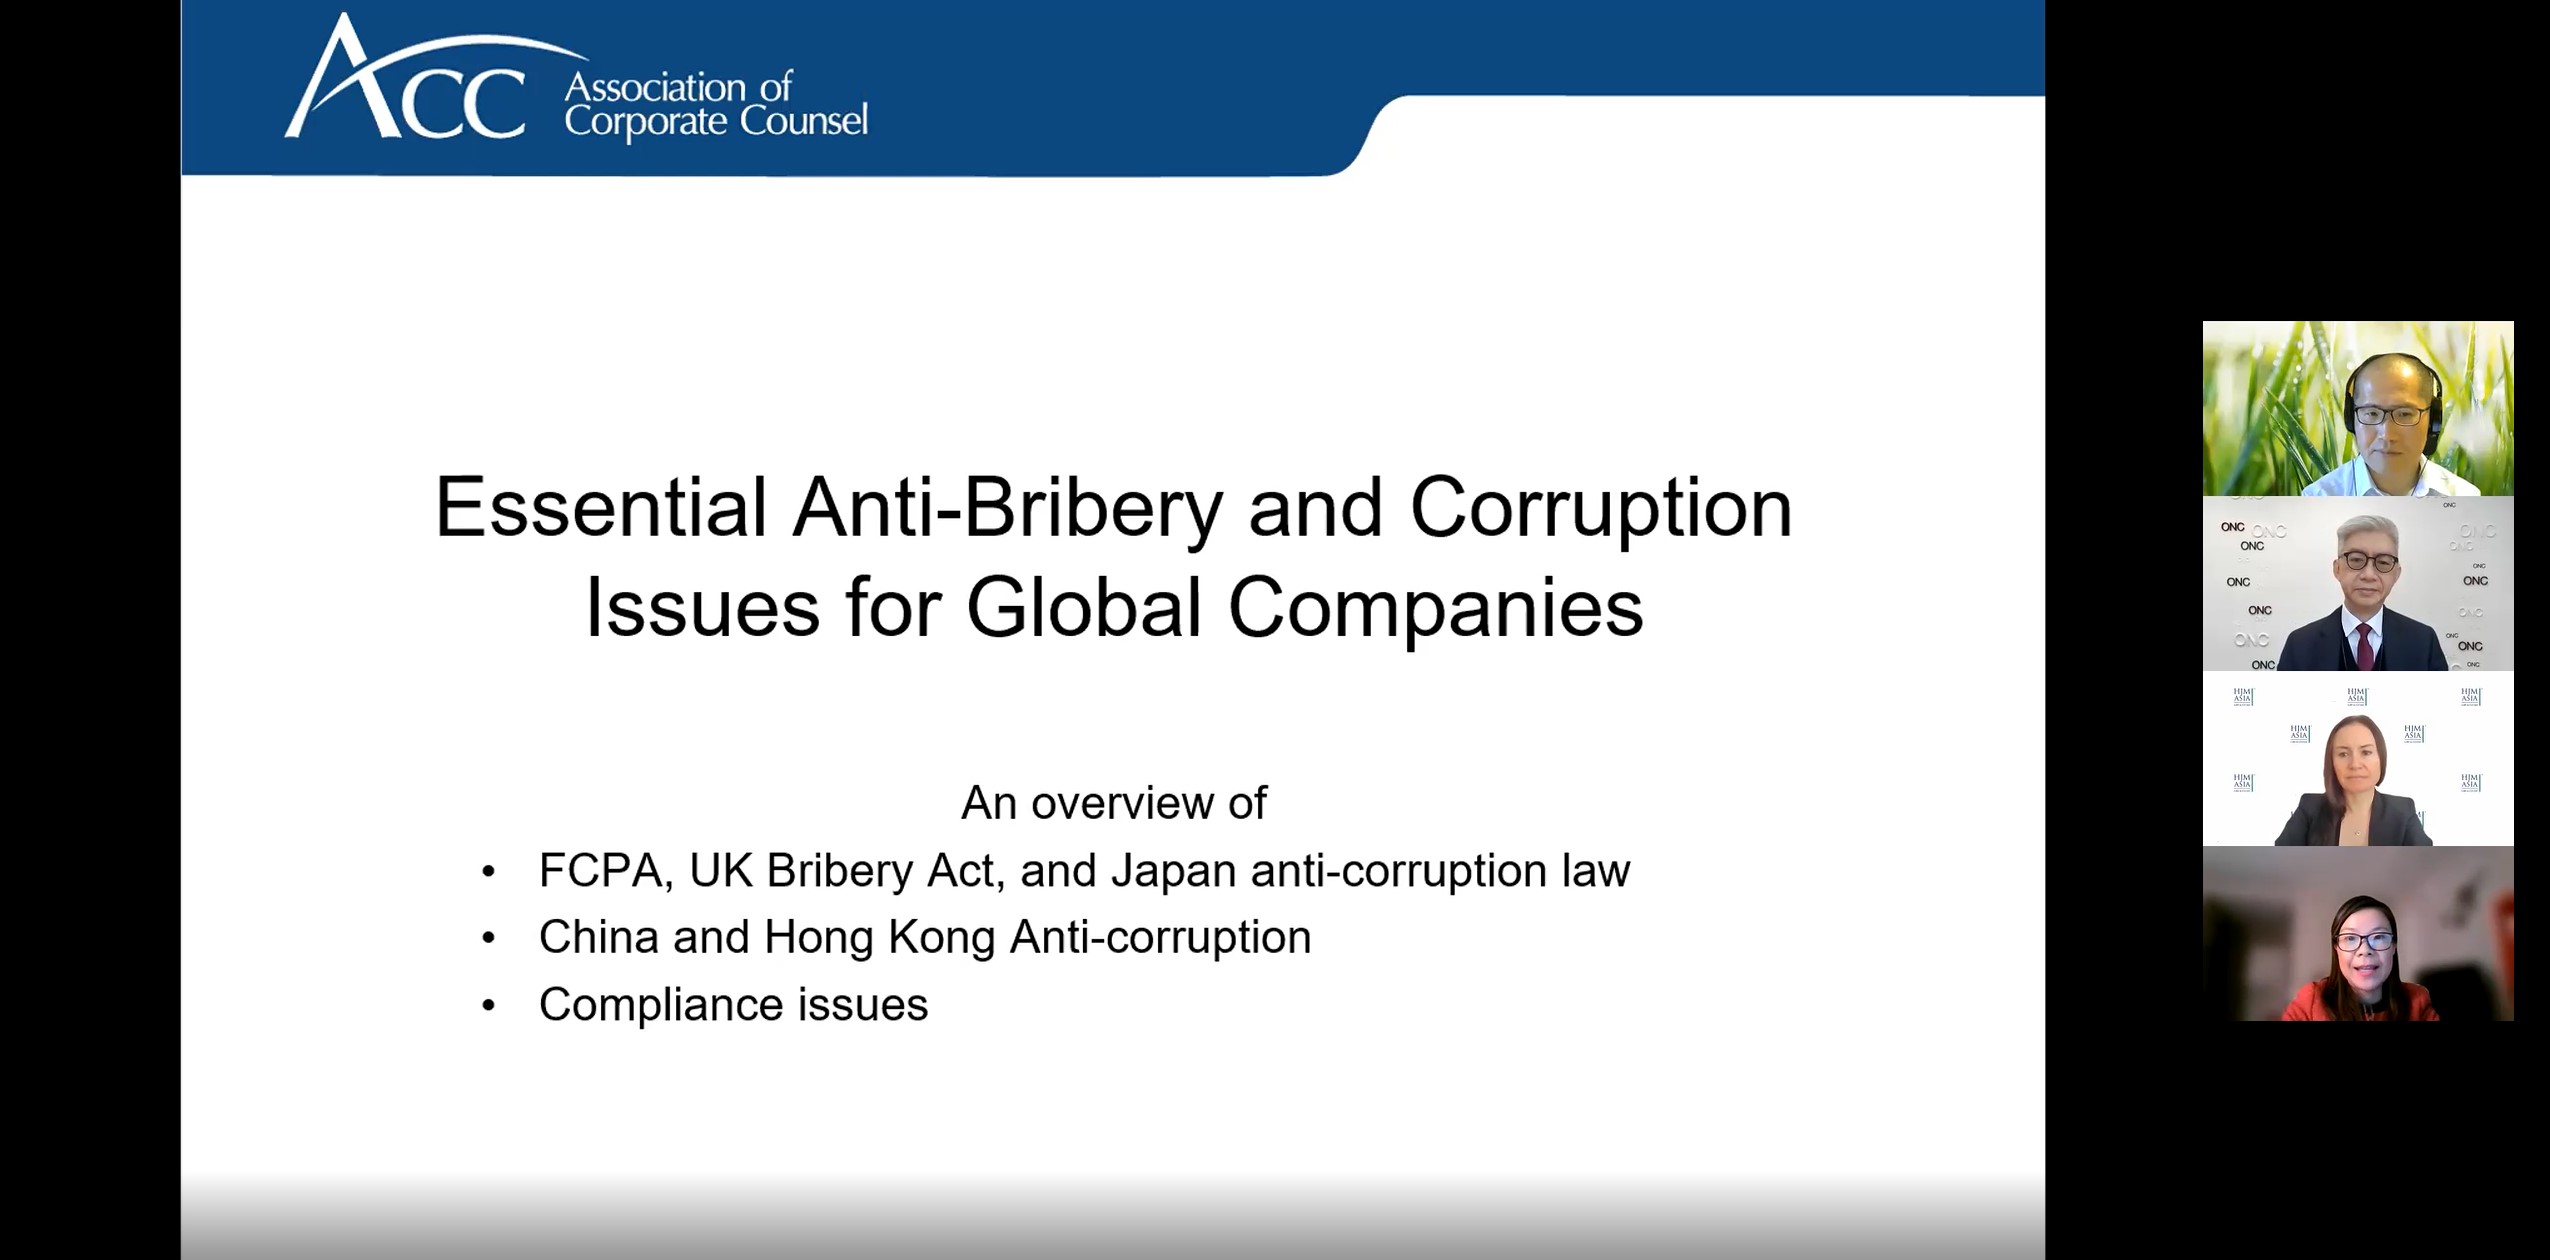 Essential Anti-Bribery and Corruption Issues for Global Companies